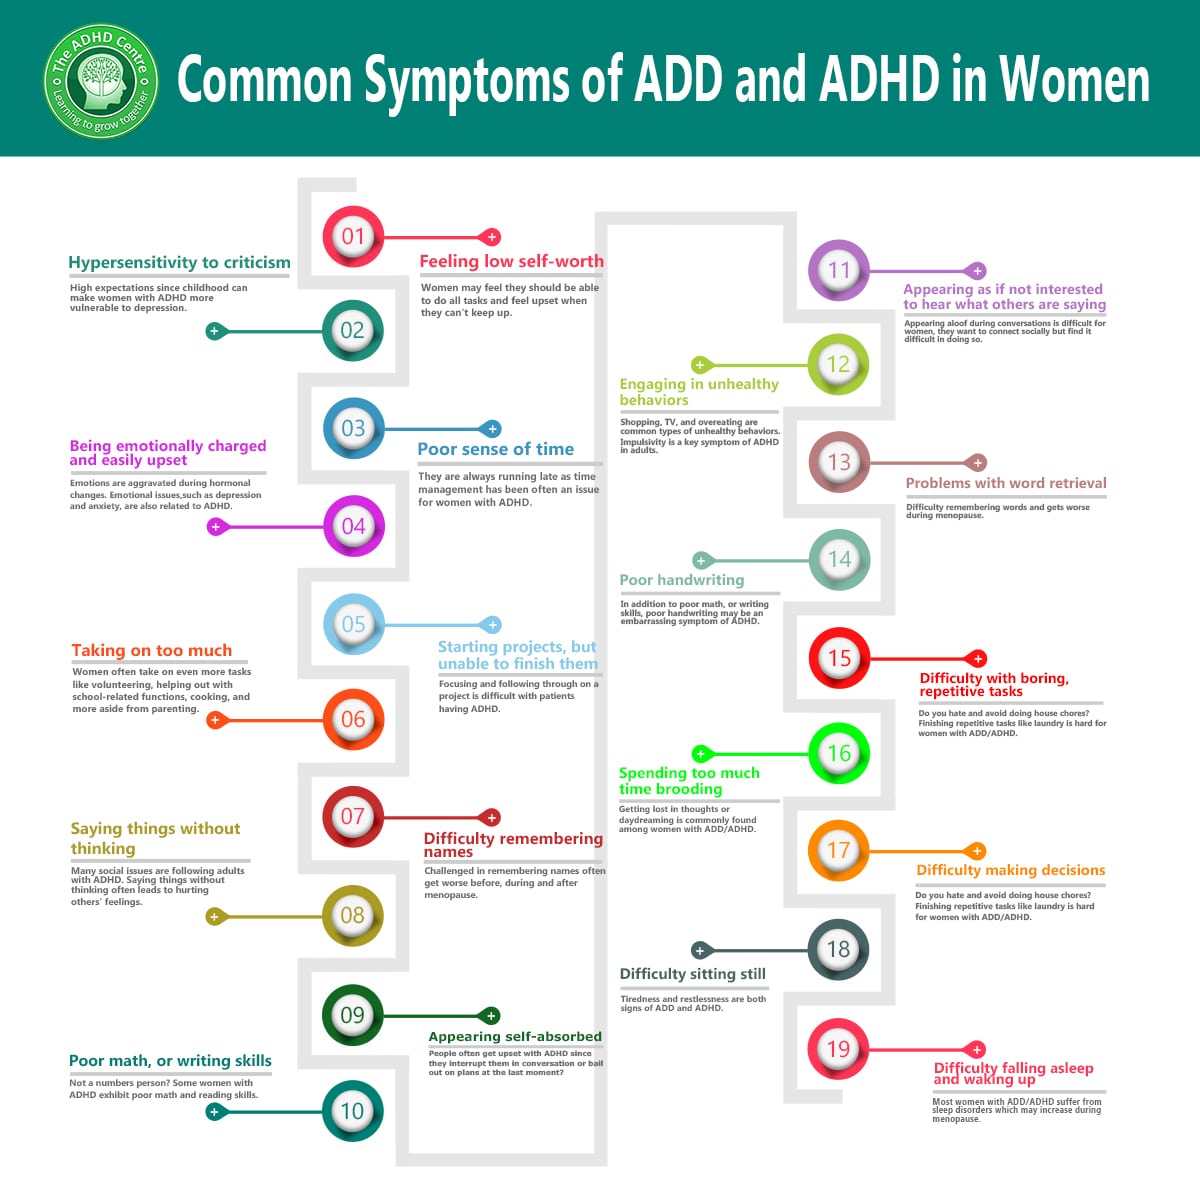 Common Symptoms of ADD and ADHD in Women